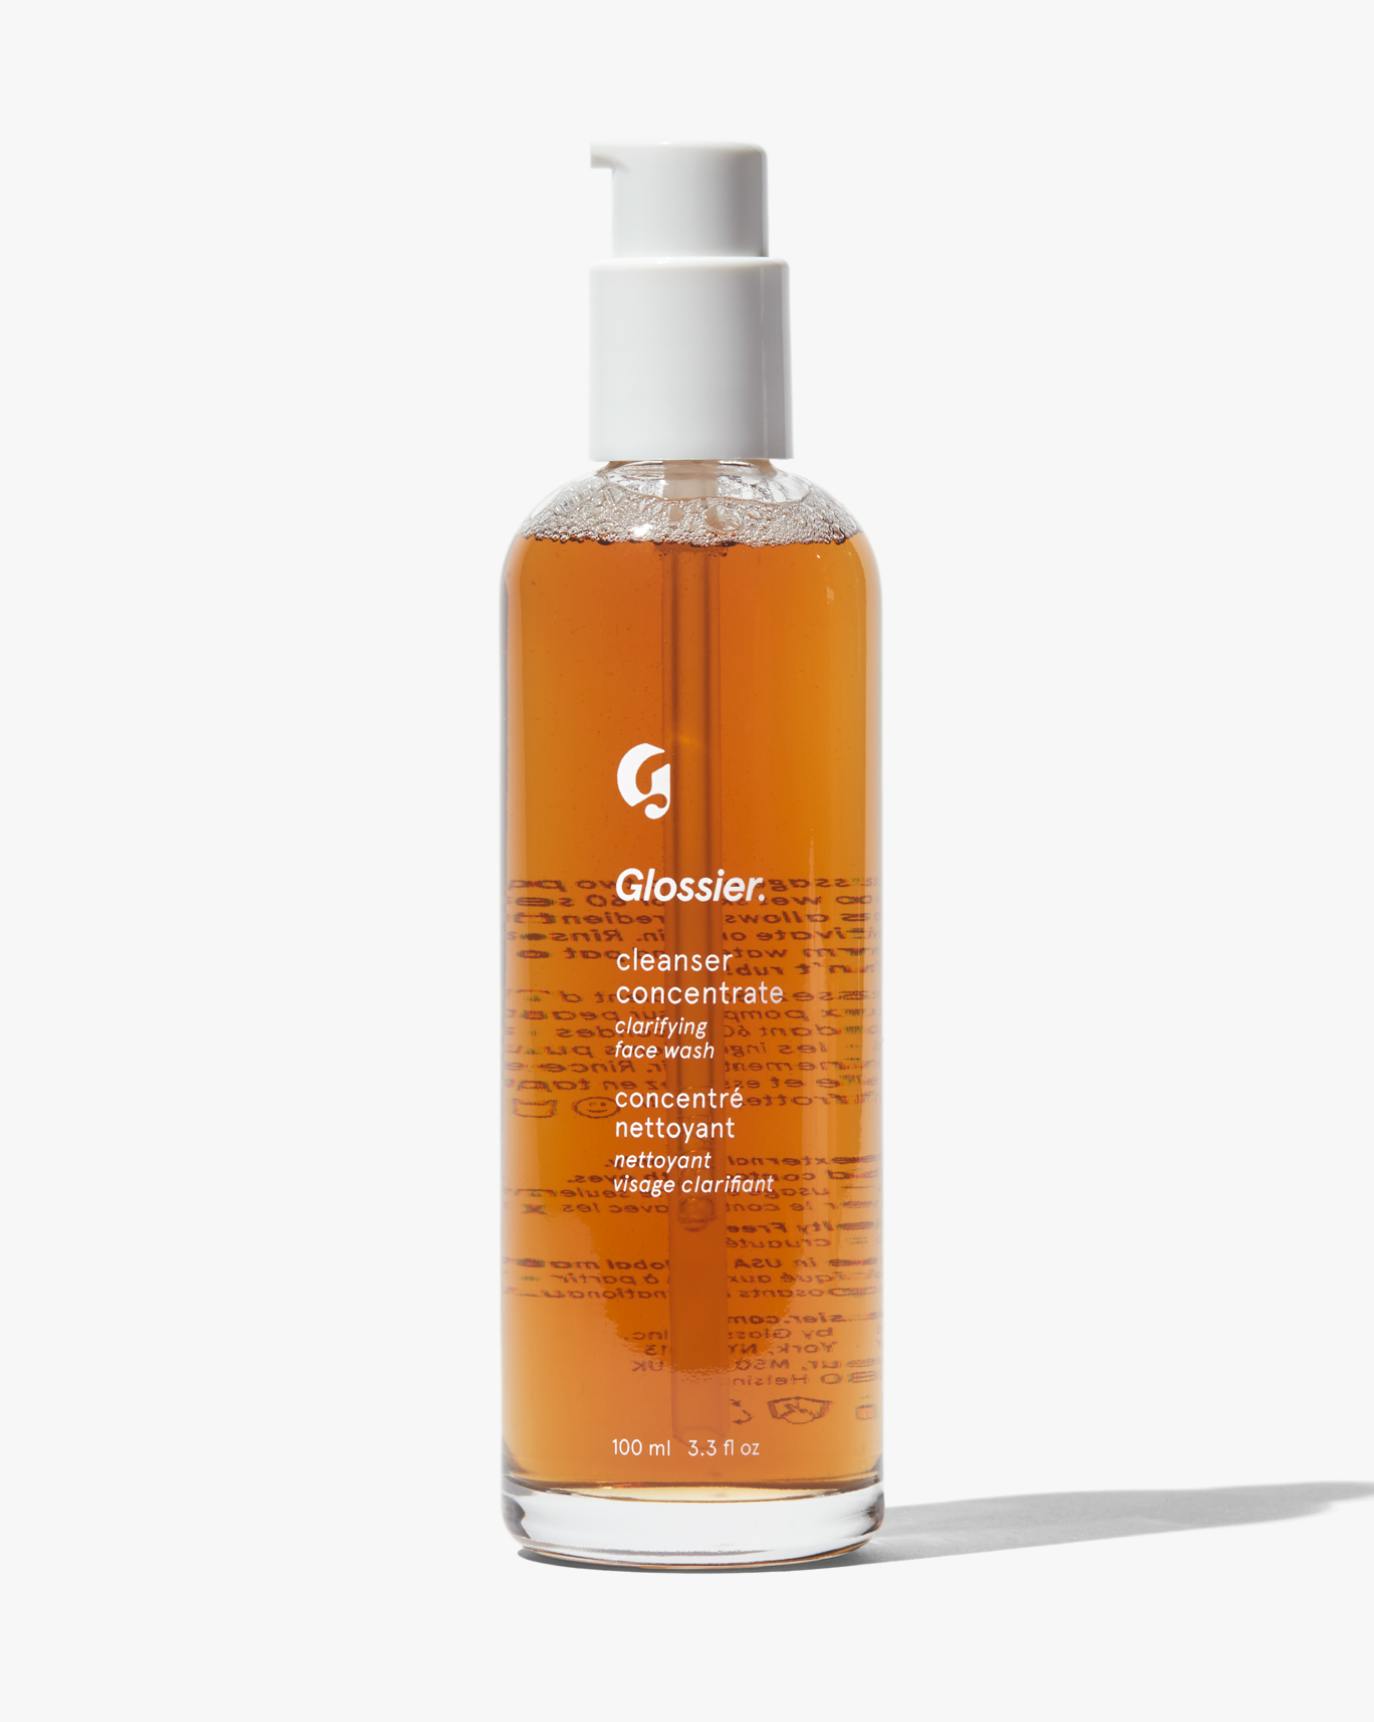 cleanser concentrate bottle